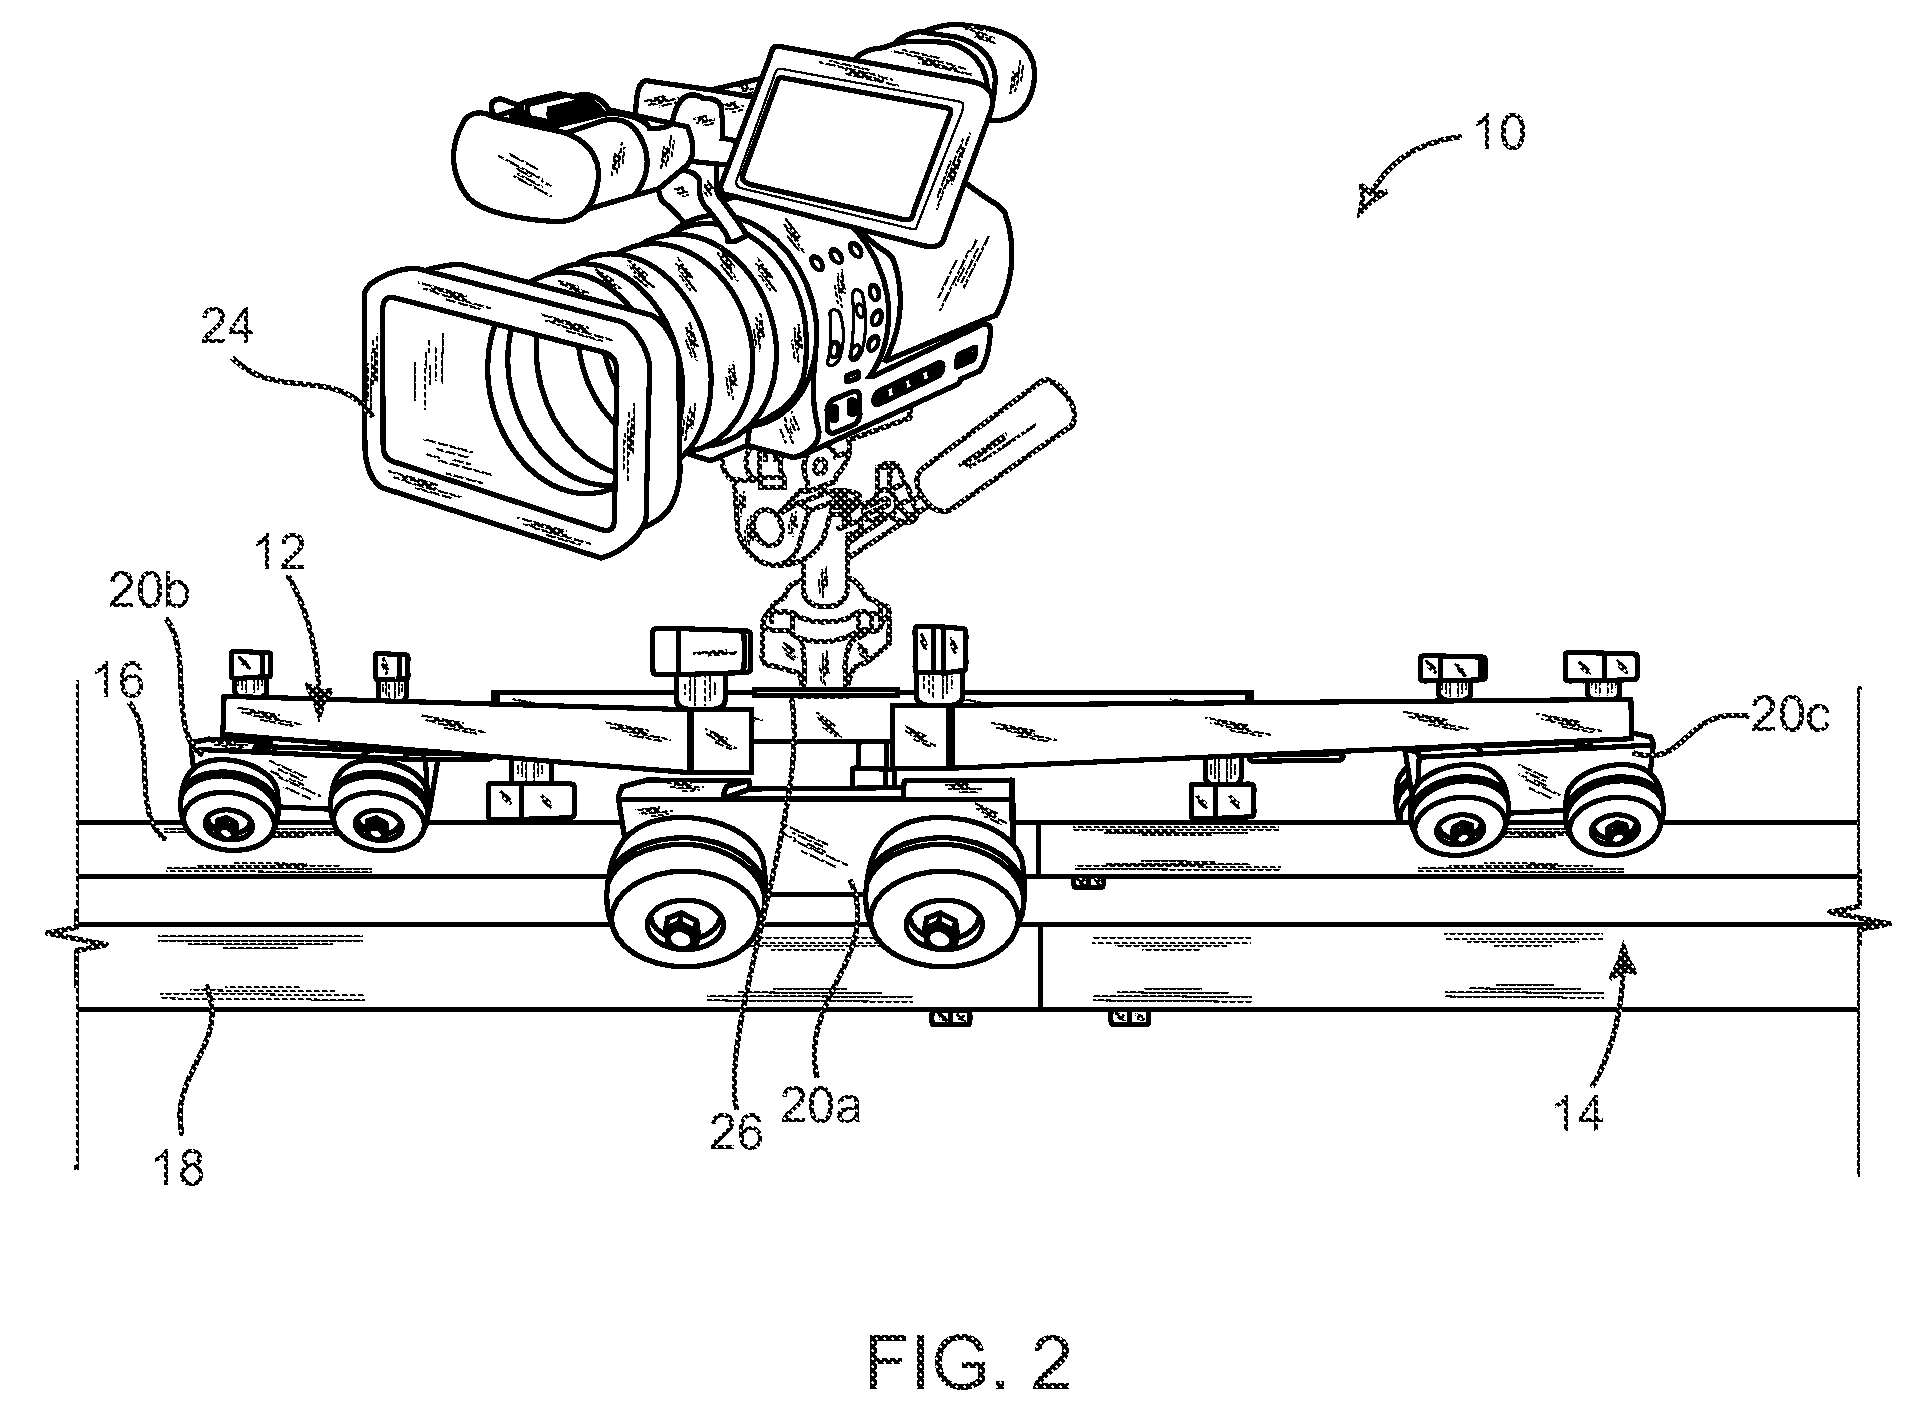 Dolly and track system